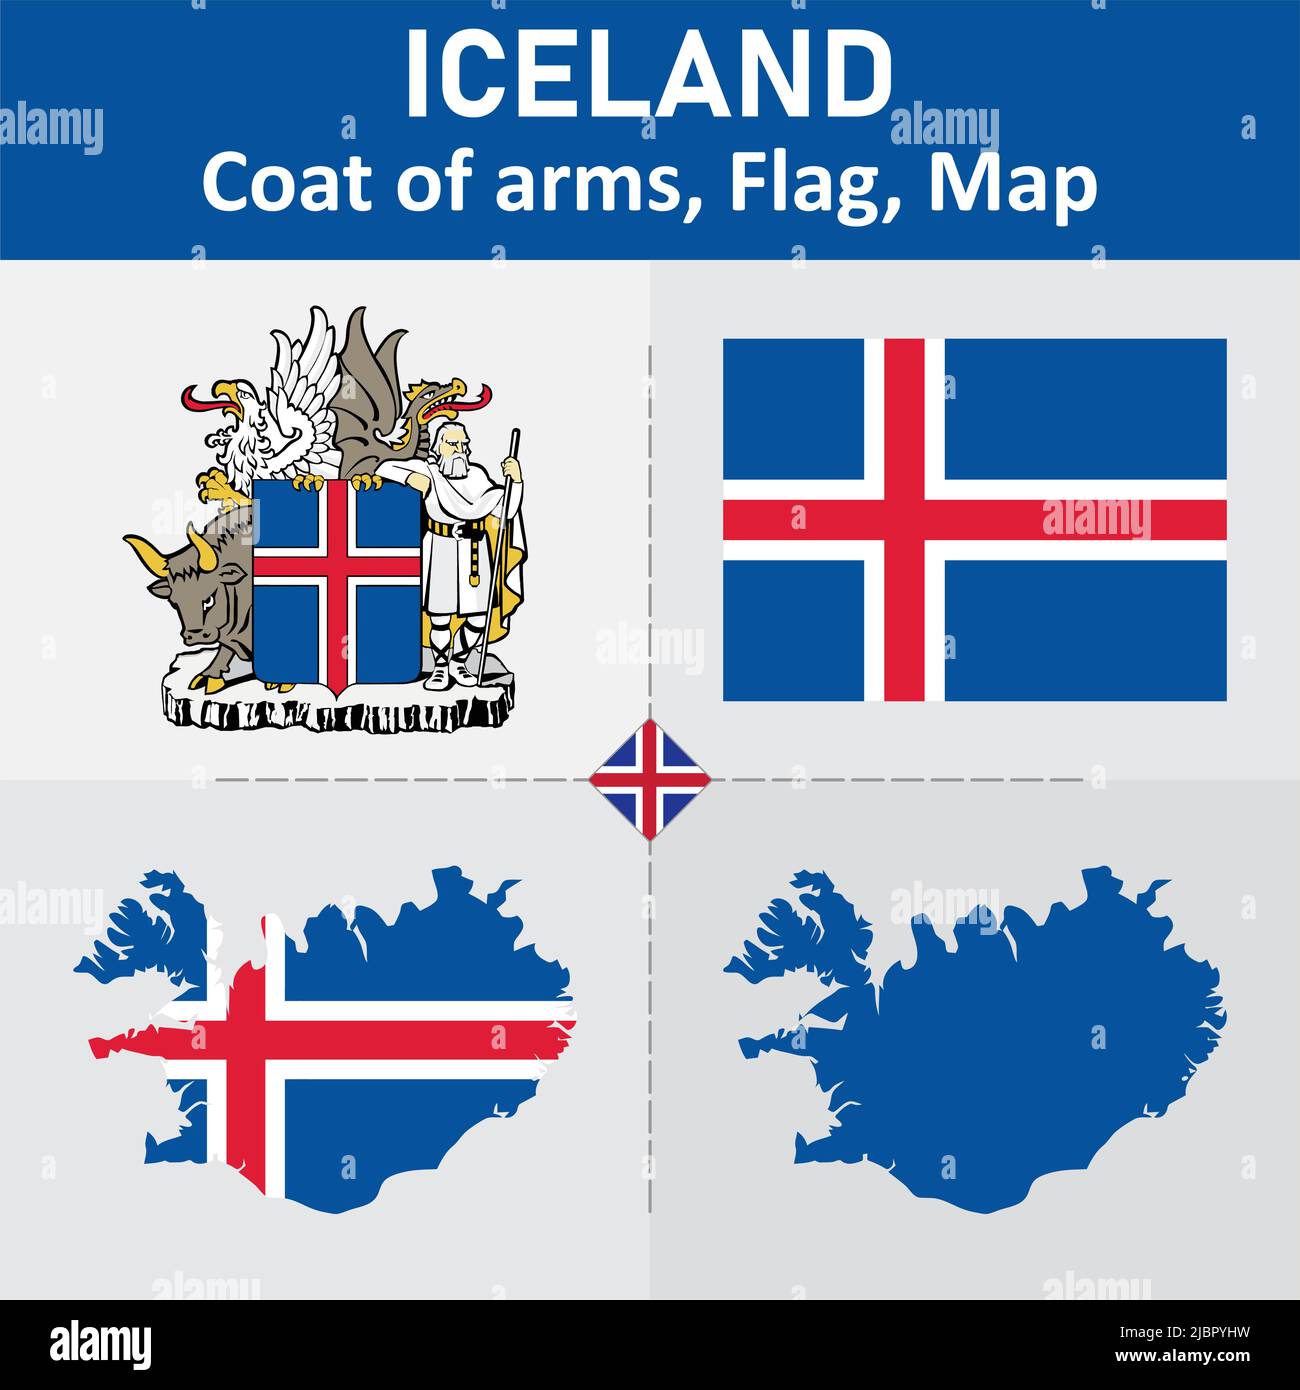 Iceland Coat of Arms, Flag and Map Stock Vector